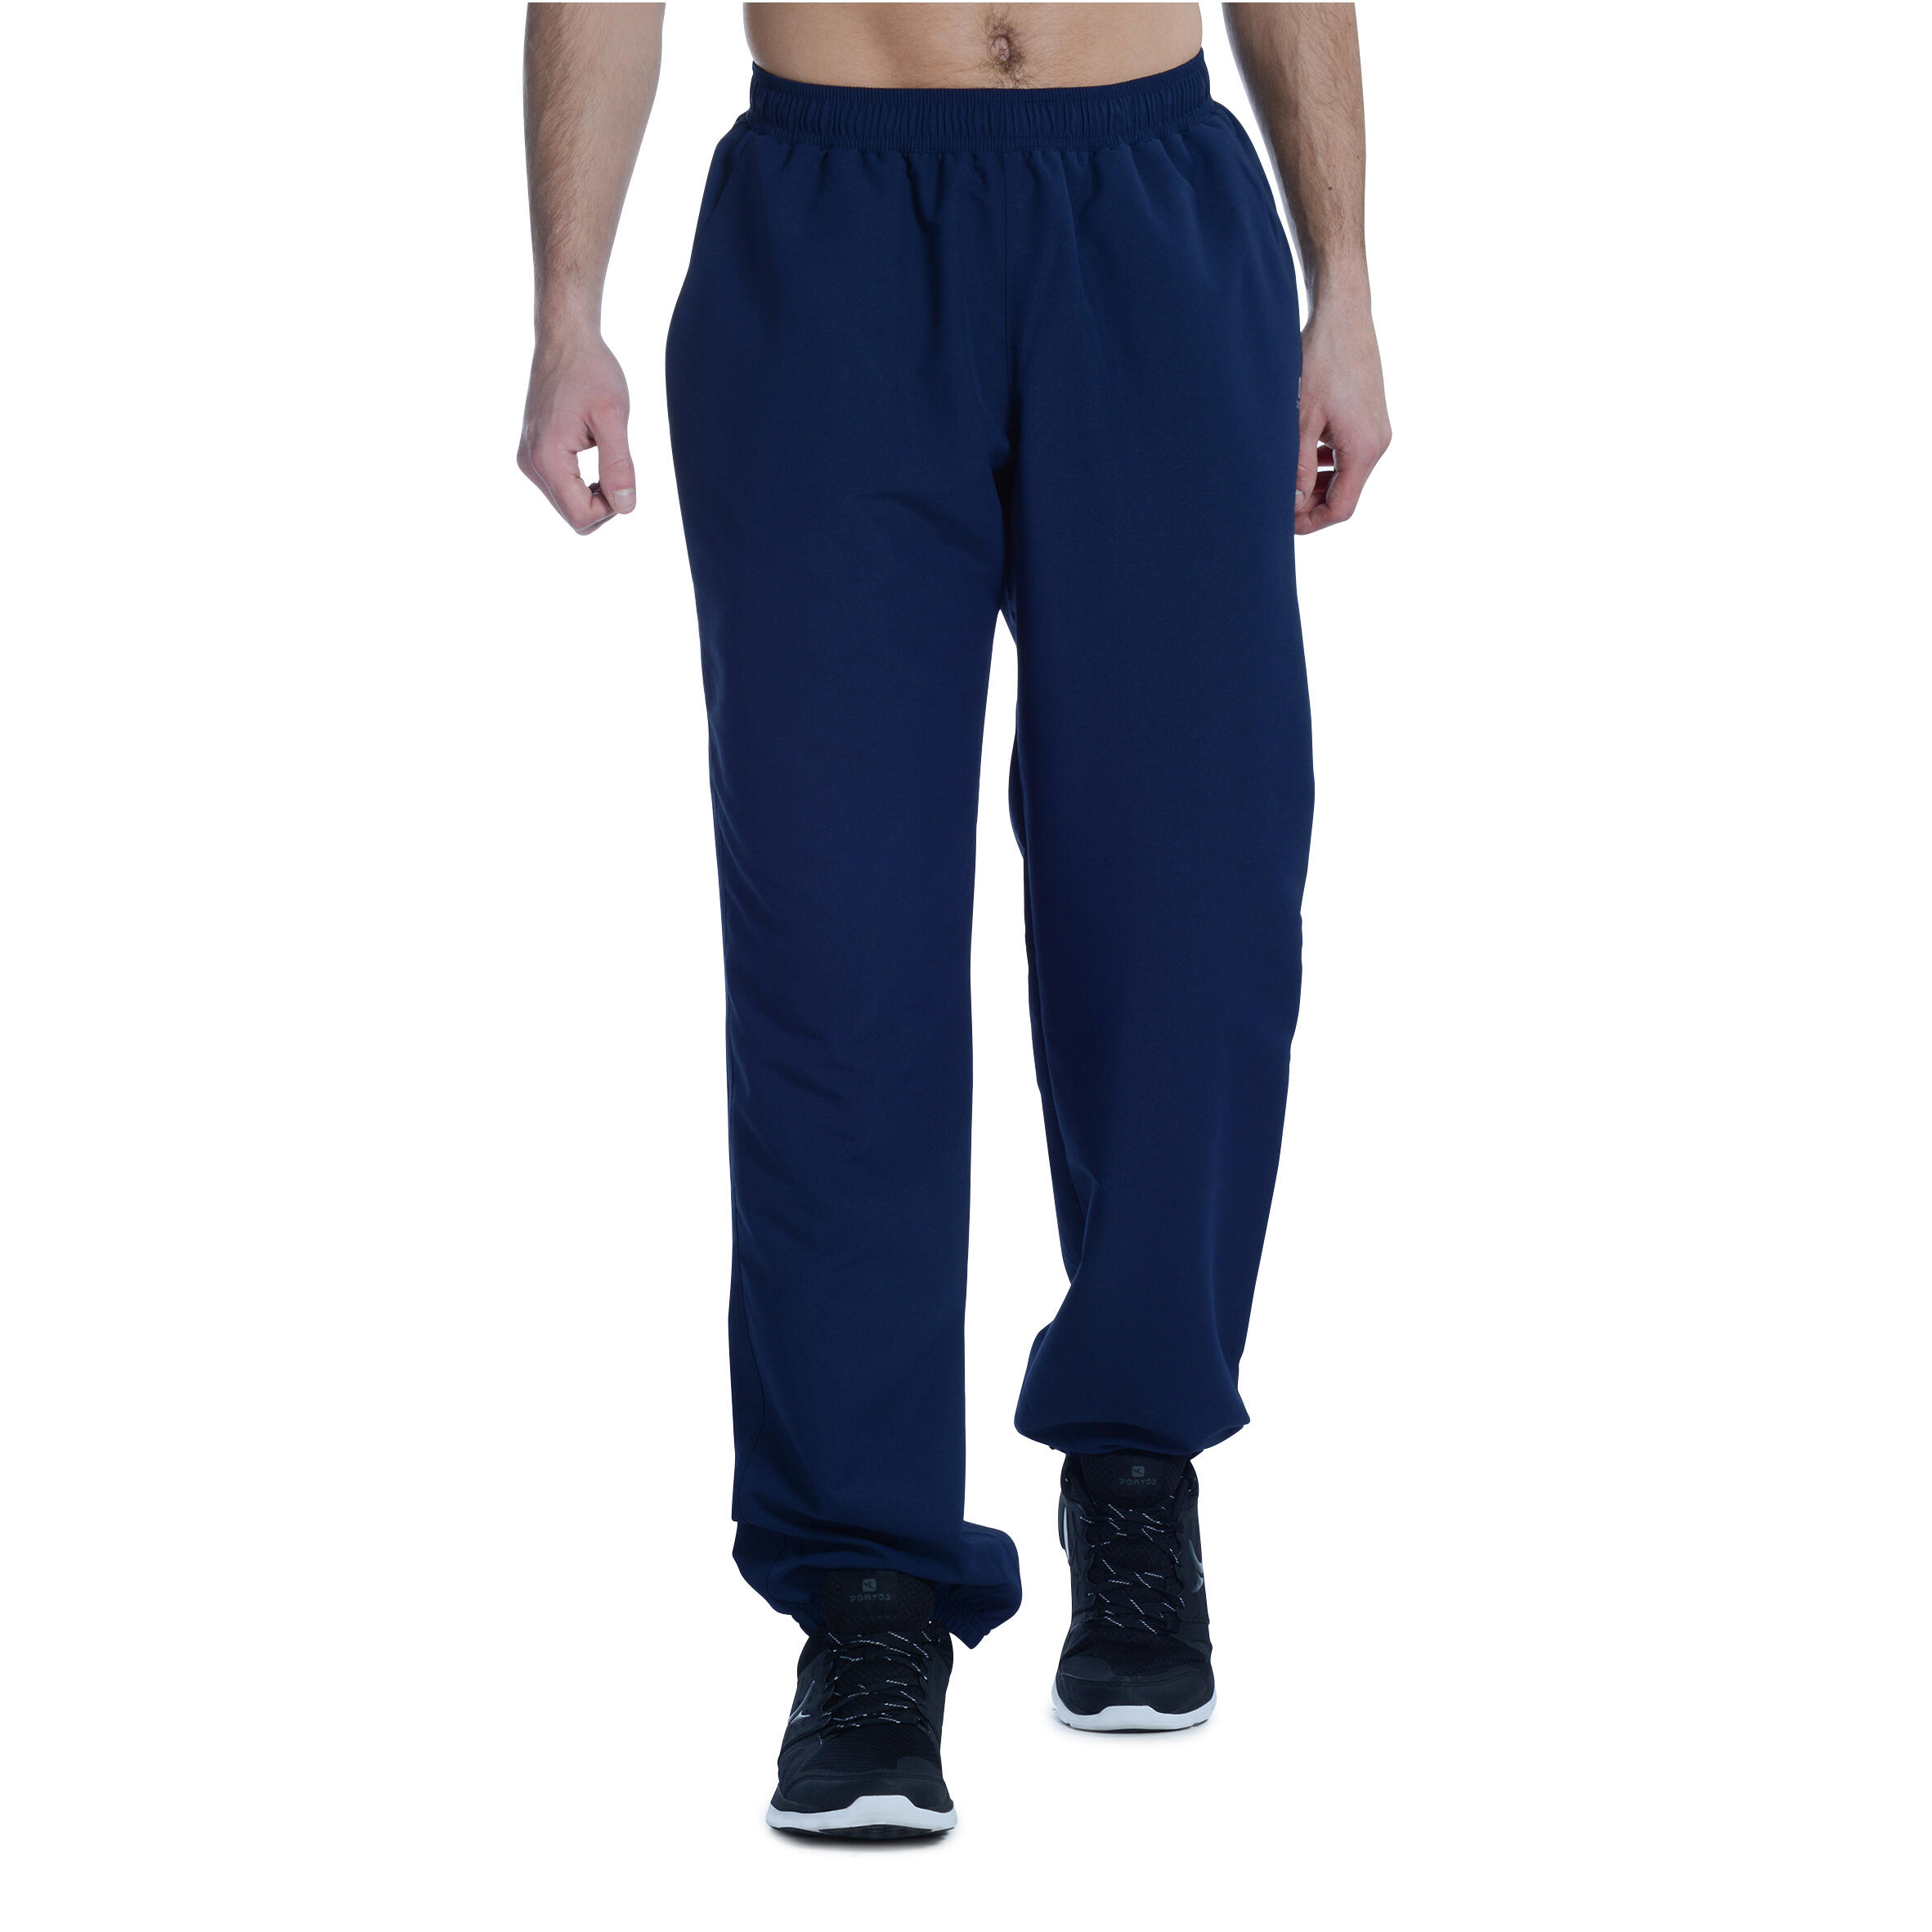 Buy Men Polyester Non-Stretchable Gym Track Pants - Navy Blue Online ...